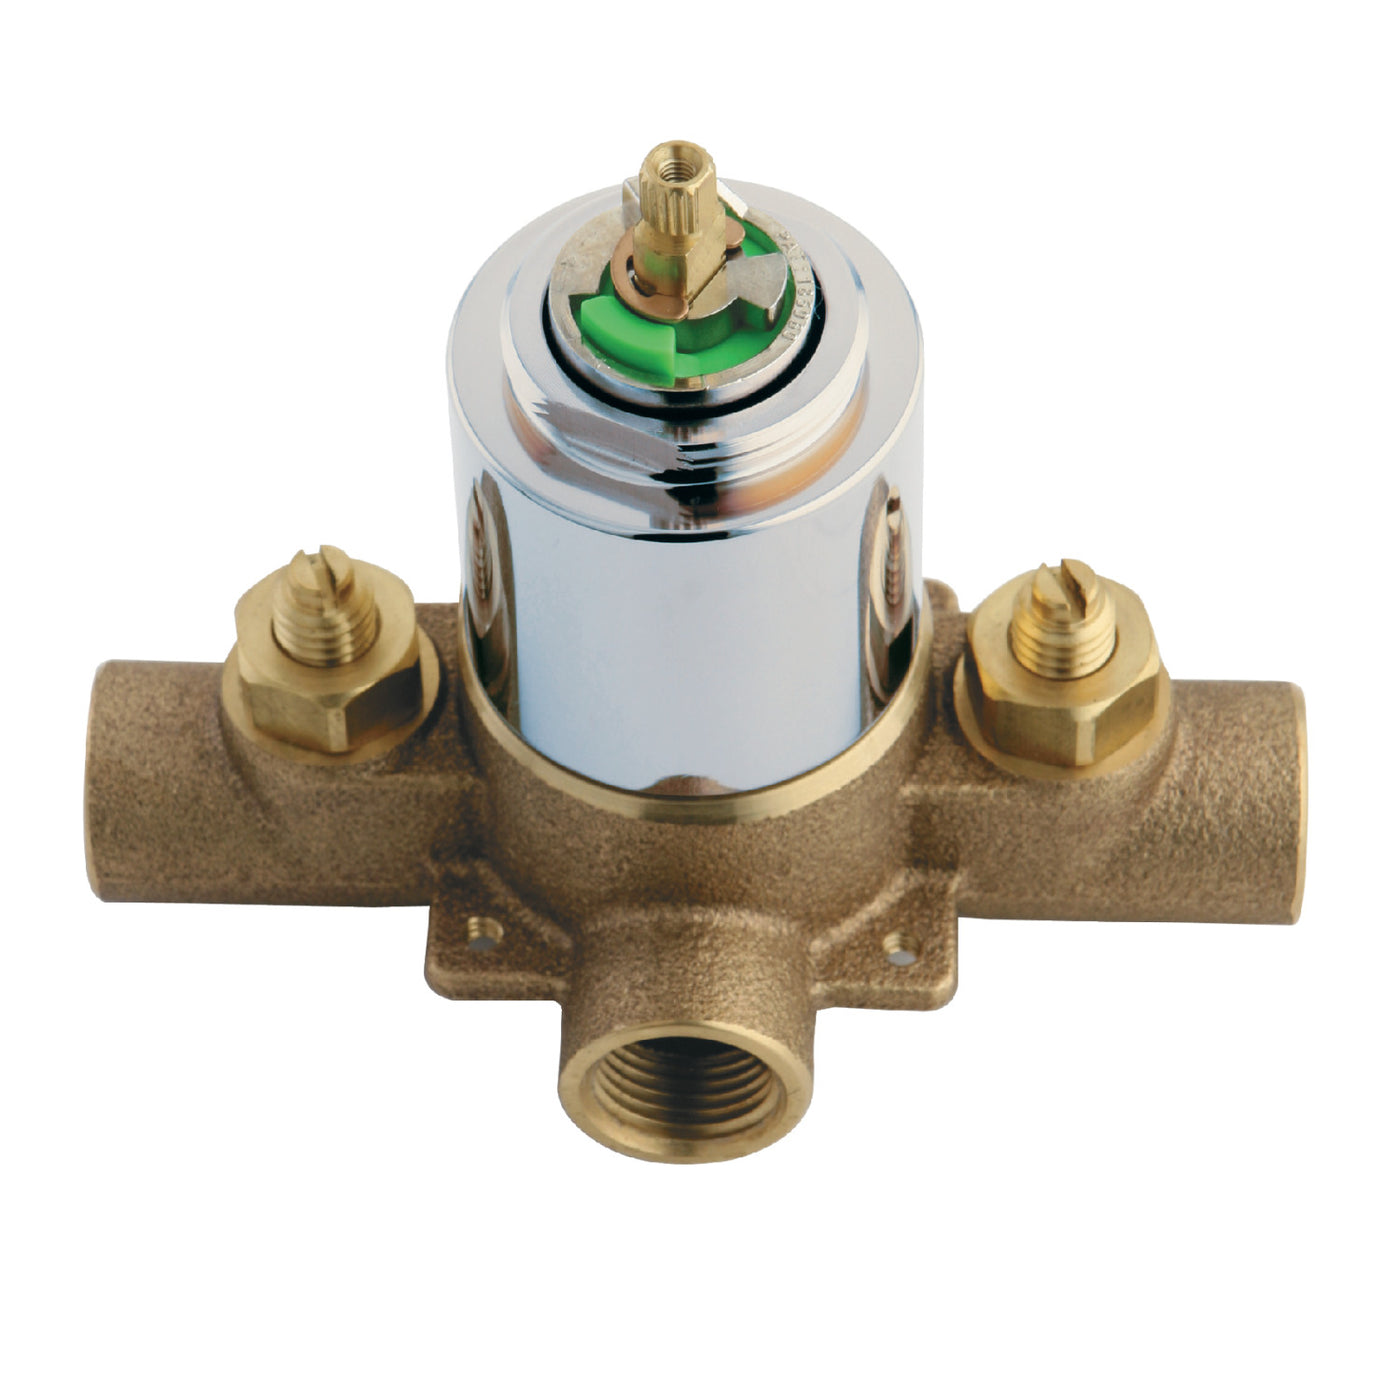 Elements of Design EB651V Pressure Balanced Rough-In Tub and Shower Valve with Stops, Polished Chrome